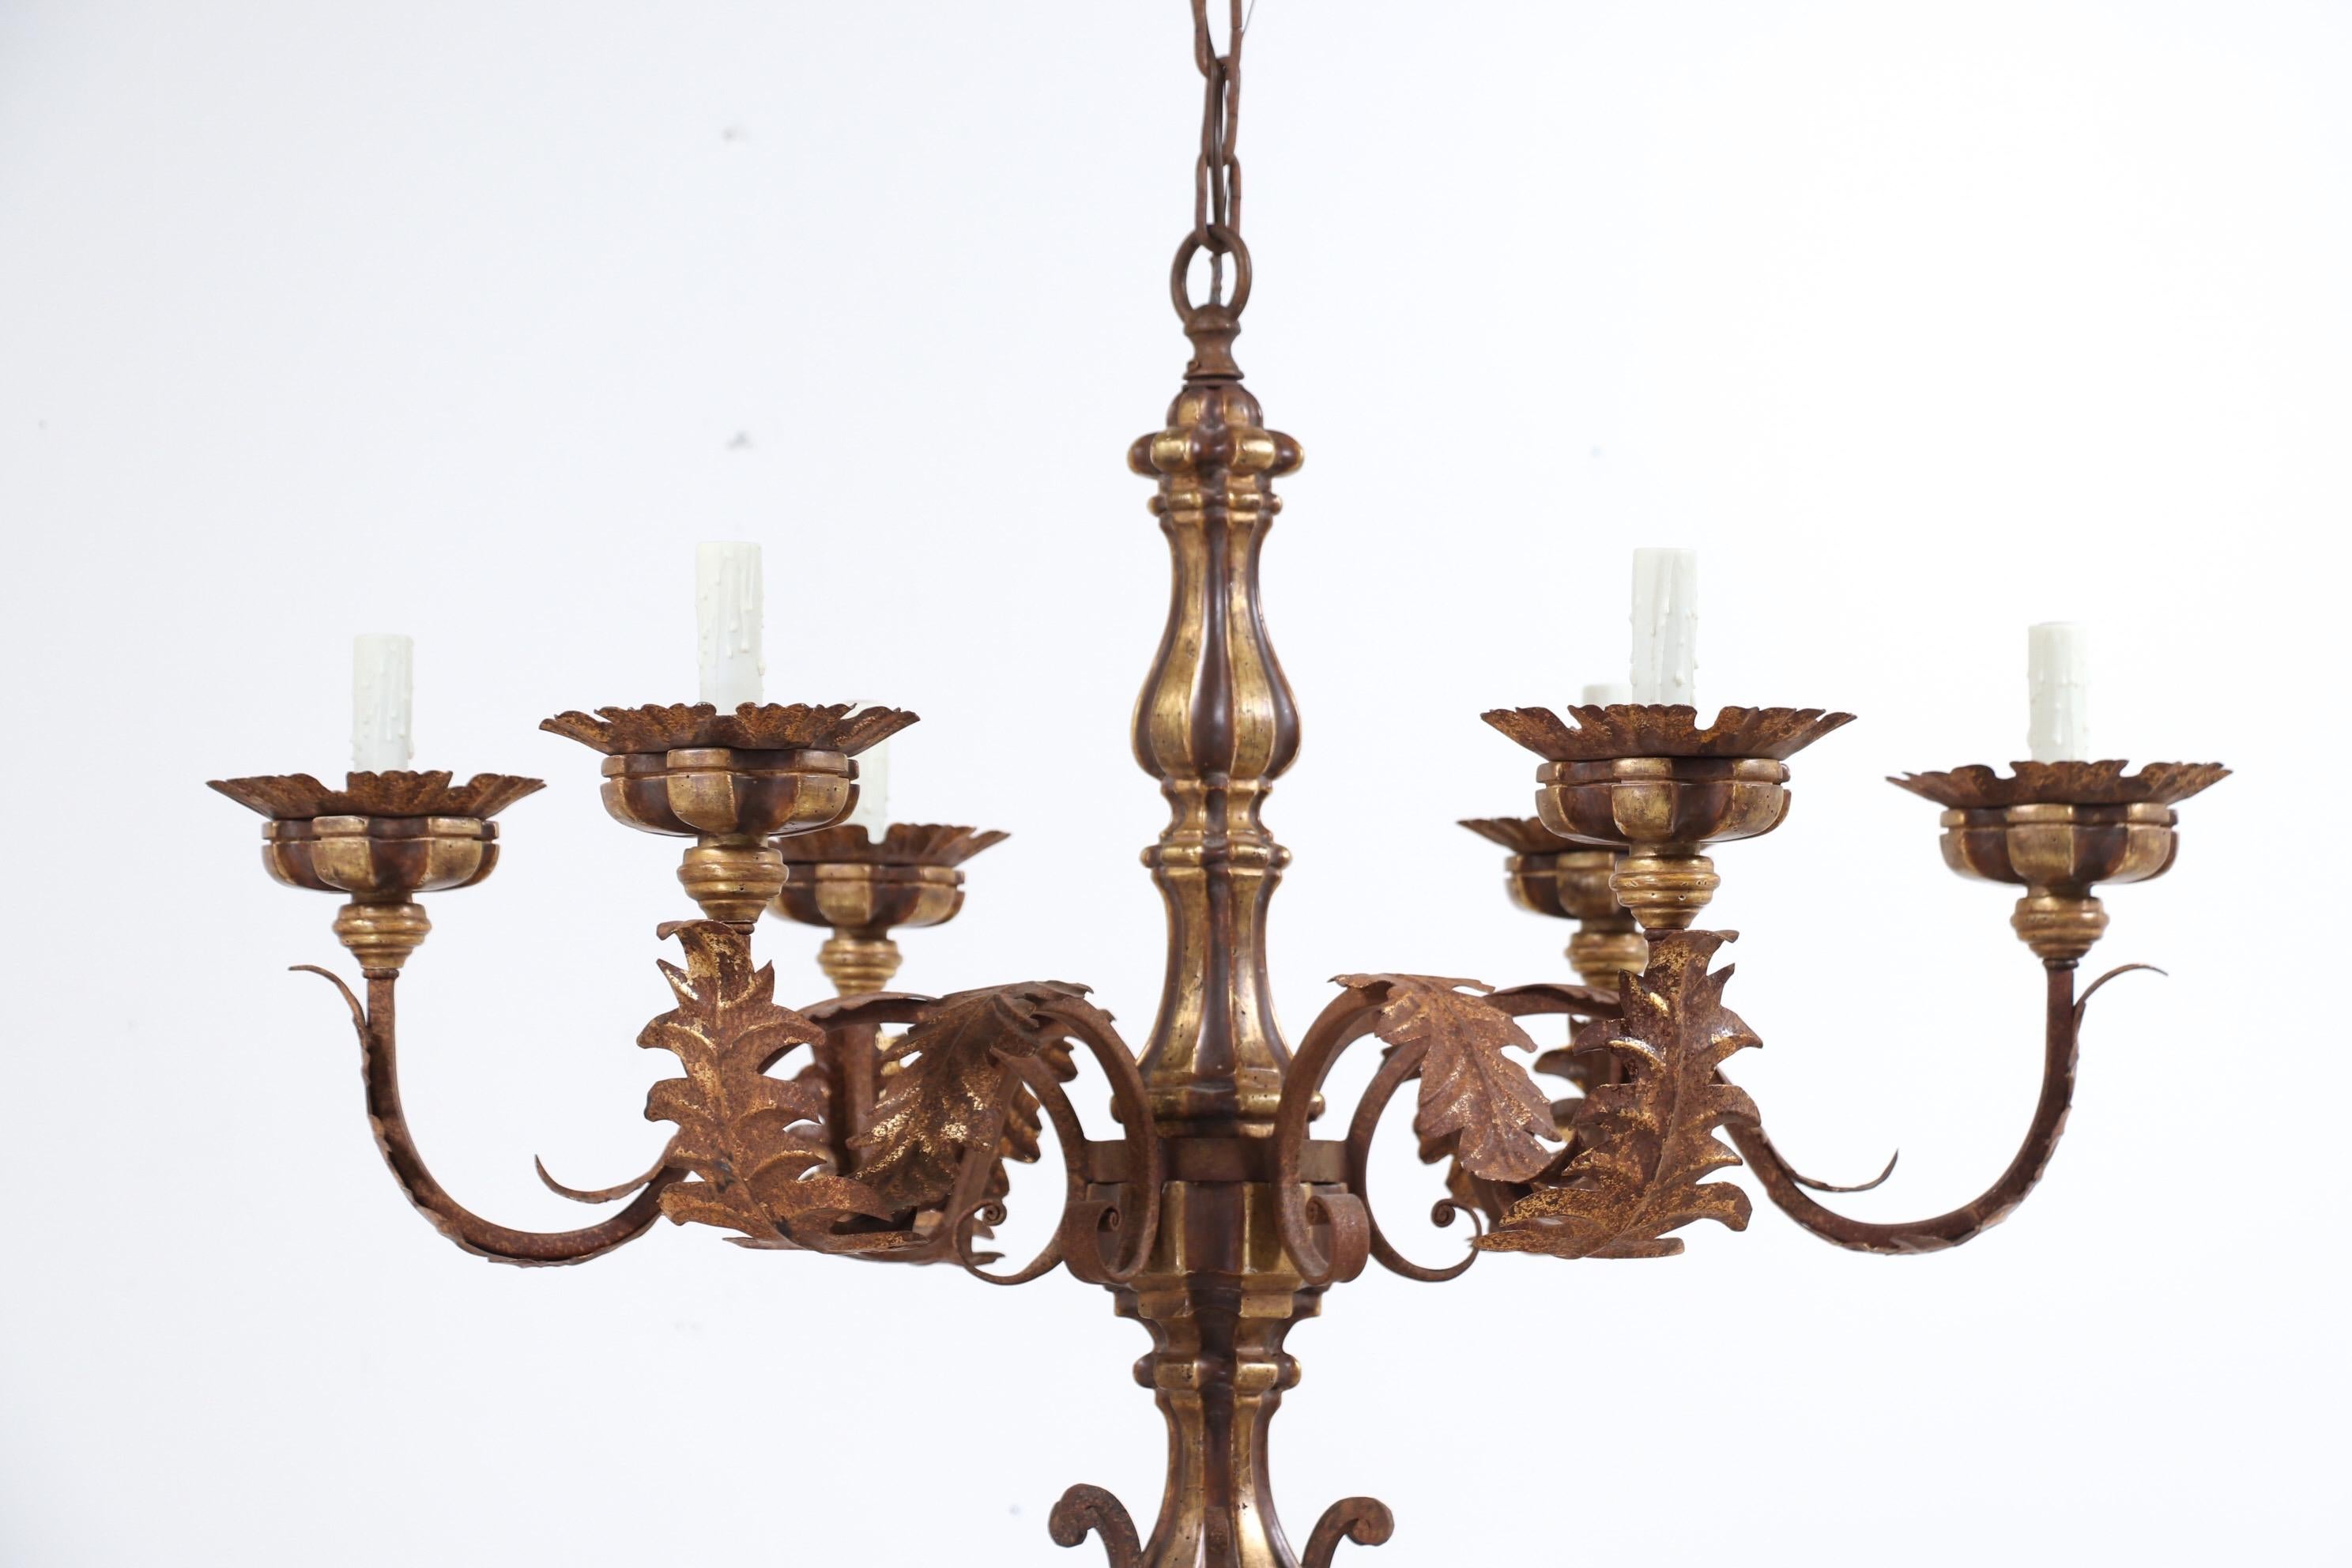 French Provincial Monumental Italian-Style Giltwood and Iron Chandelier By Paul Ferrante